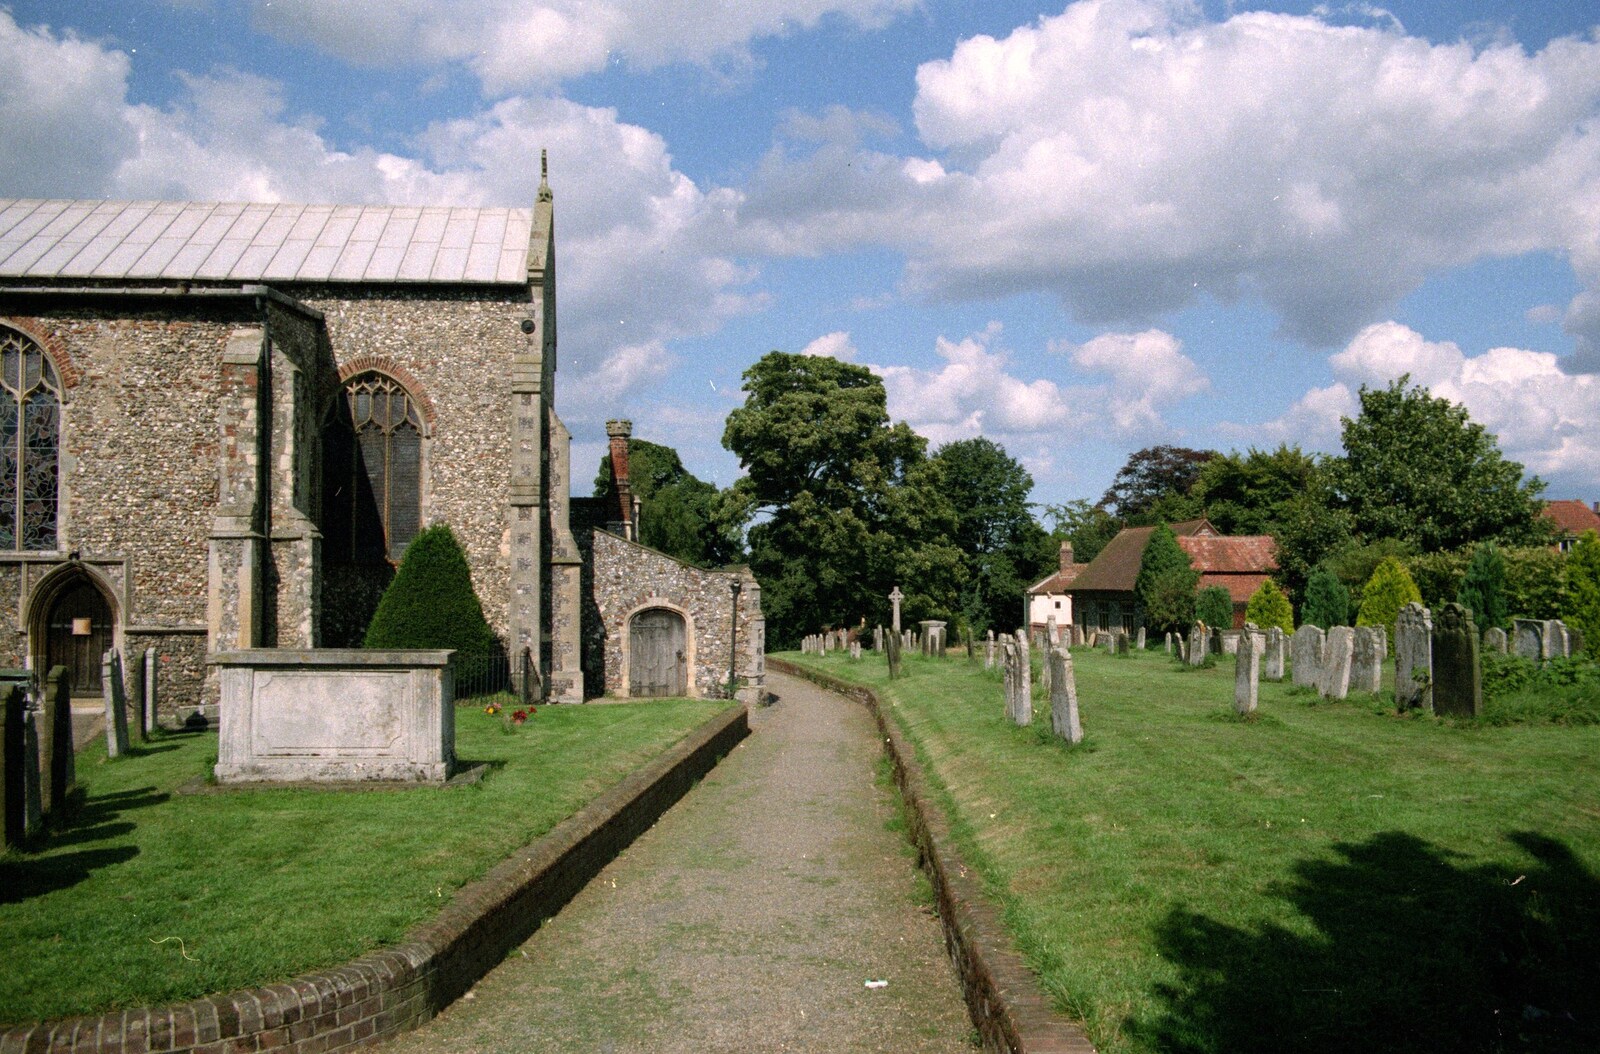 The graveyard of St. Michael from Soman-Wherry and a Drumkit, Norwich and Red House, Norfolk - 22nd July 1988